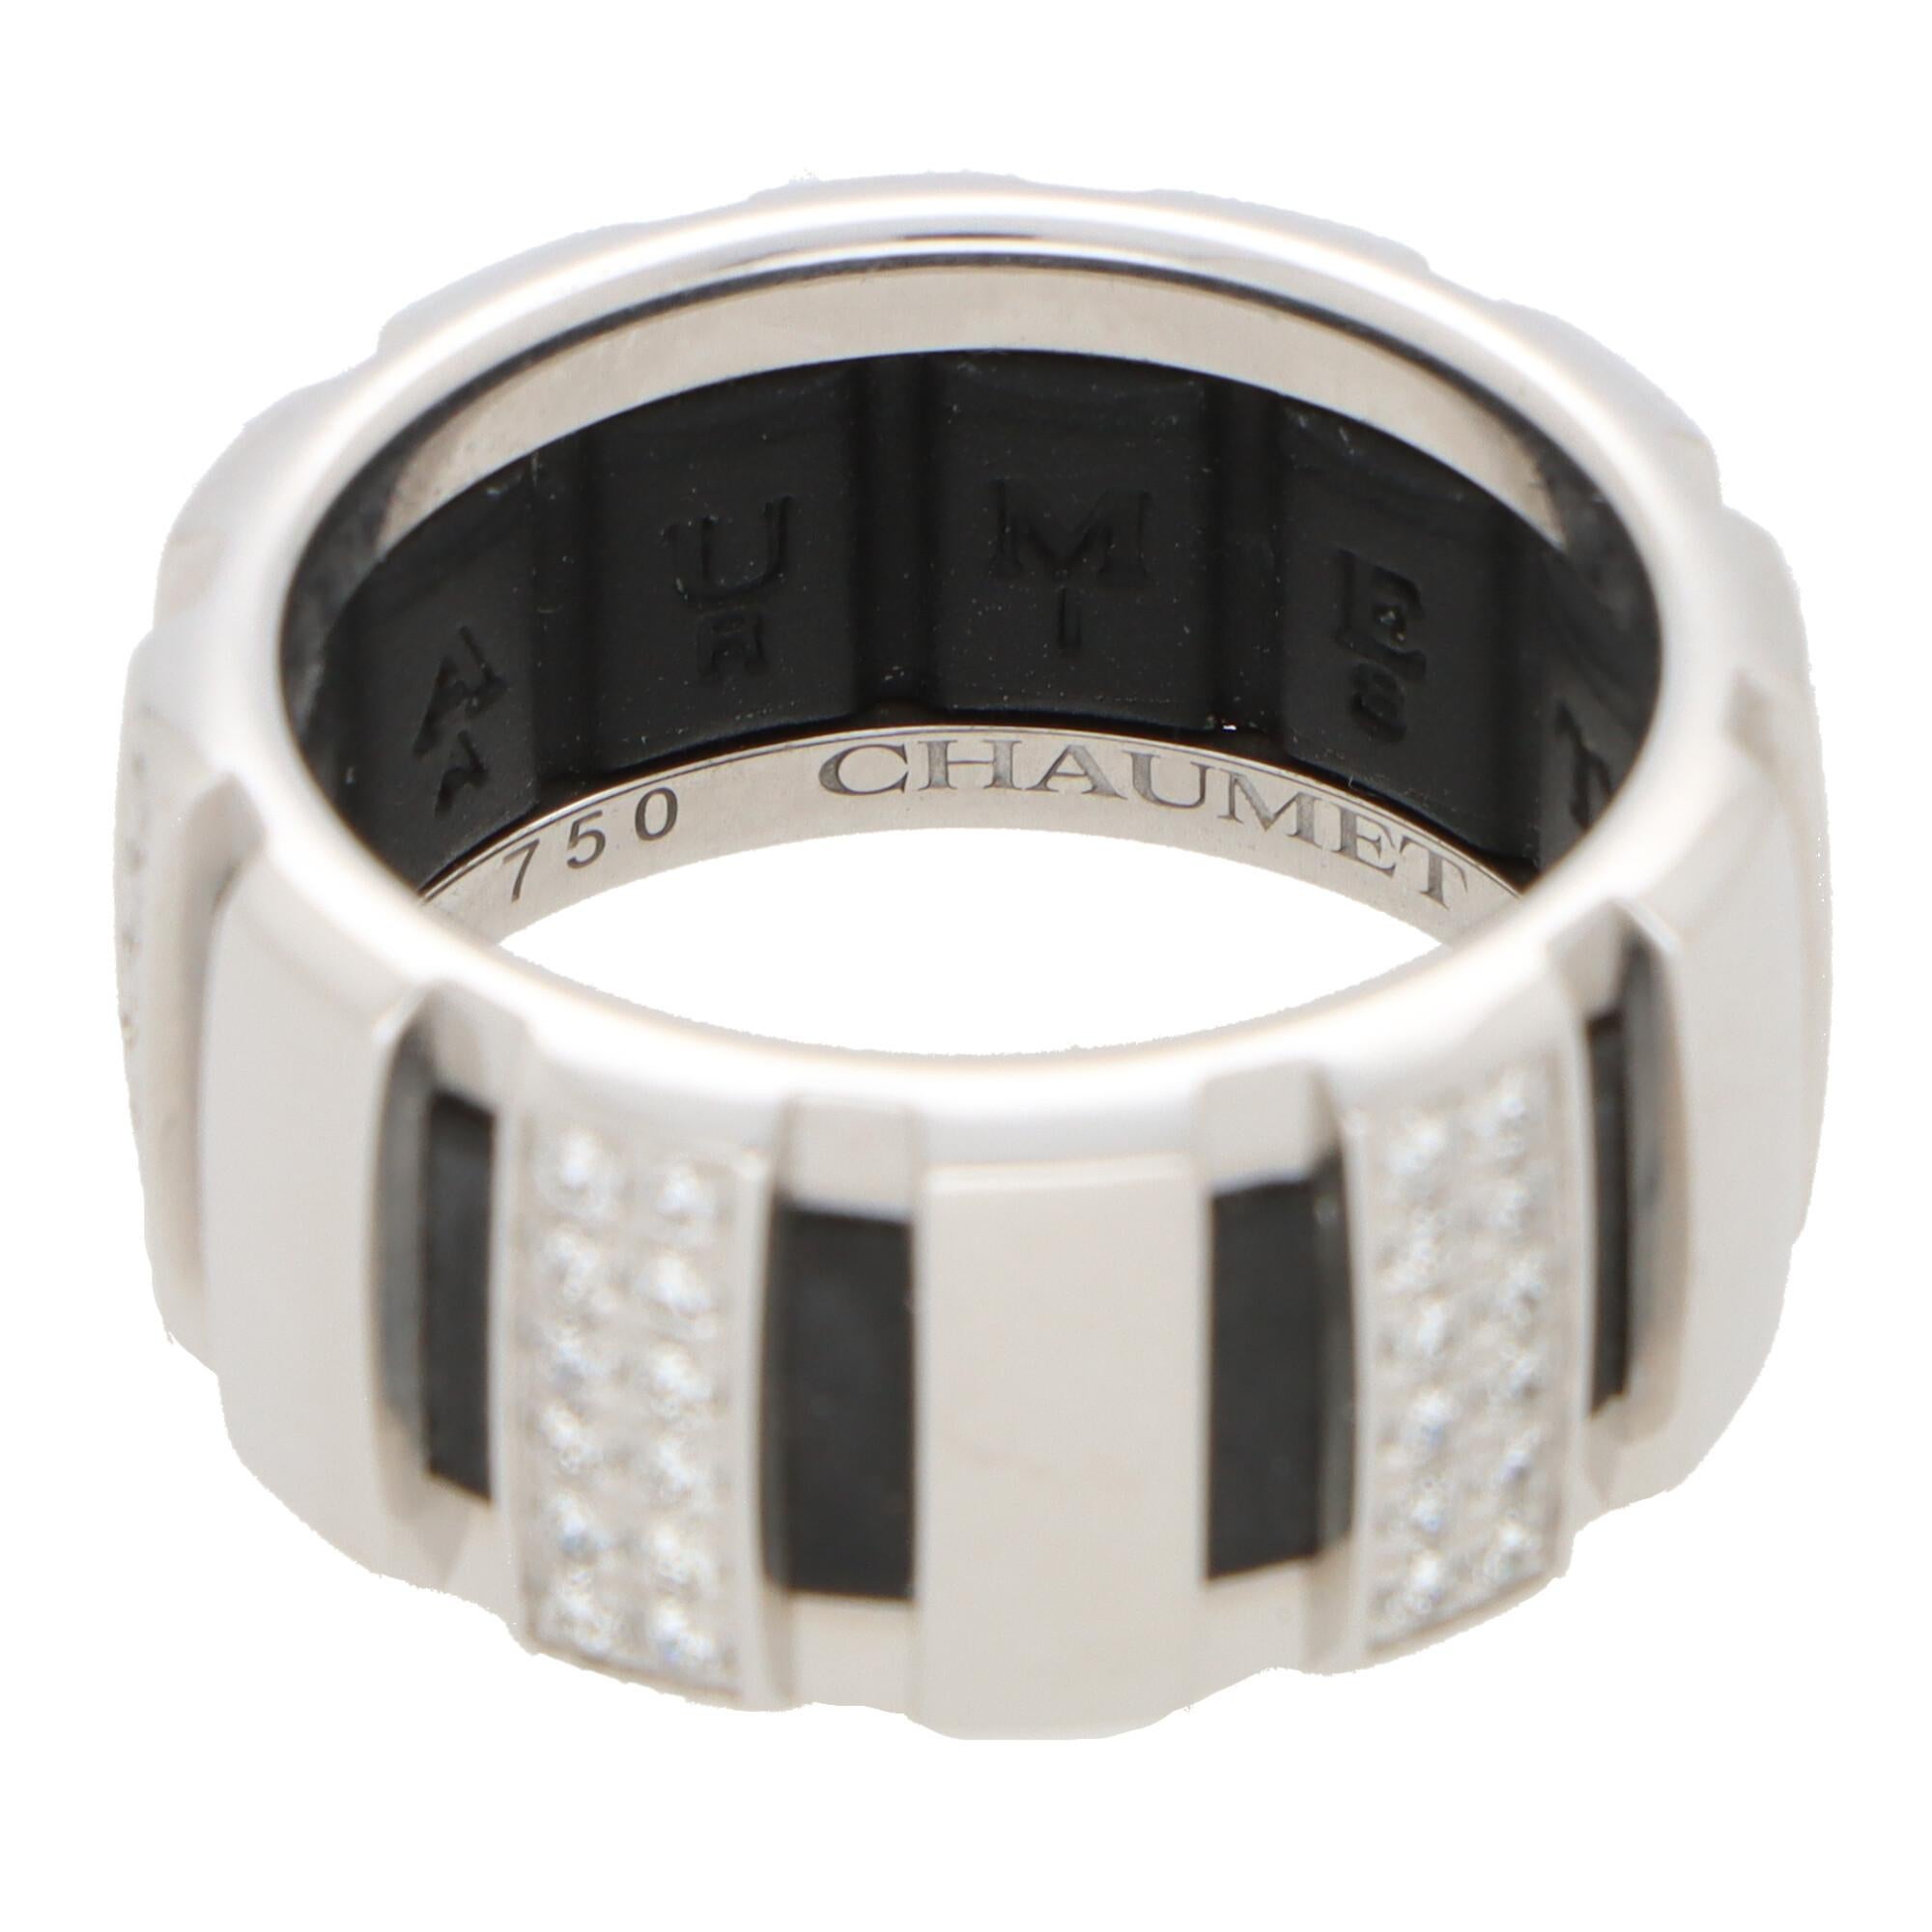 Round Cut Vintage Chaumet 'Class One' Rubber and Diamond Band Ring in 18k White Gold For Sale